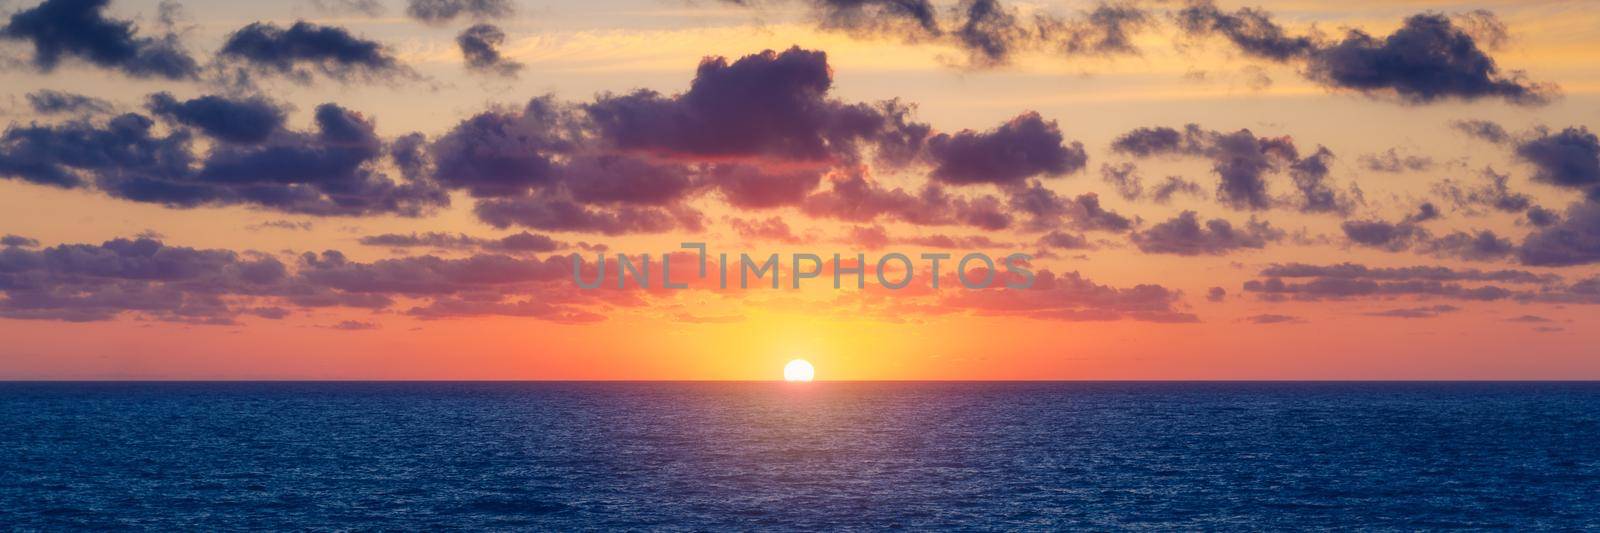 Beautiful sunset/sunrise over the sea. Beautiful sunset over the ocean. Beautiful sunset over sea with reflection in water, majestic clouds in the sky by DaLiu